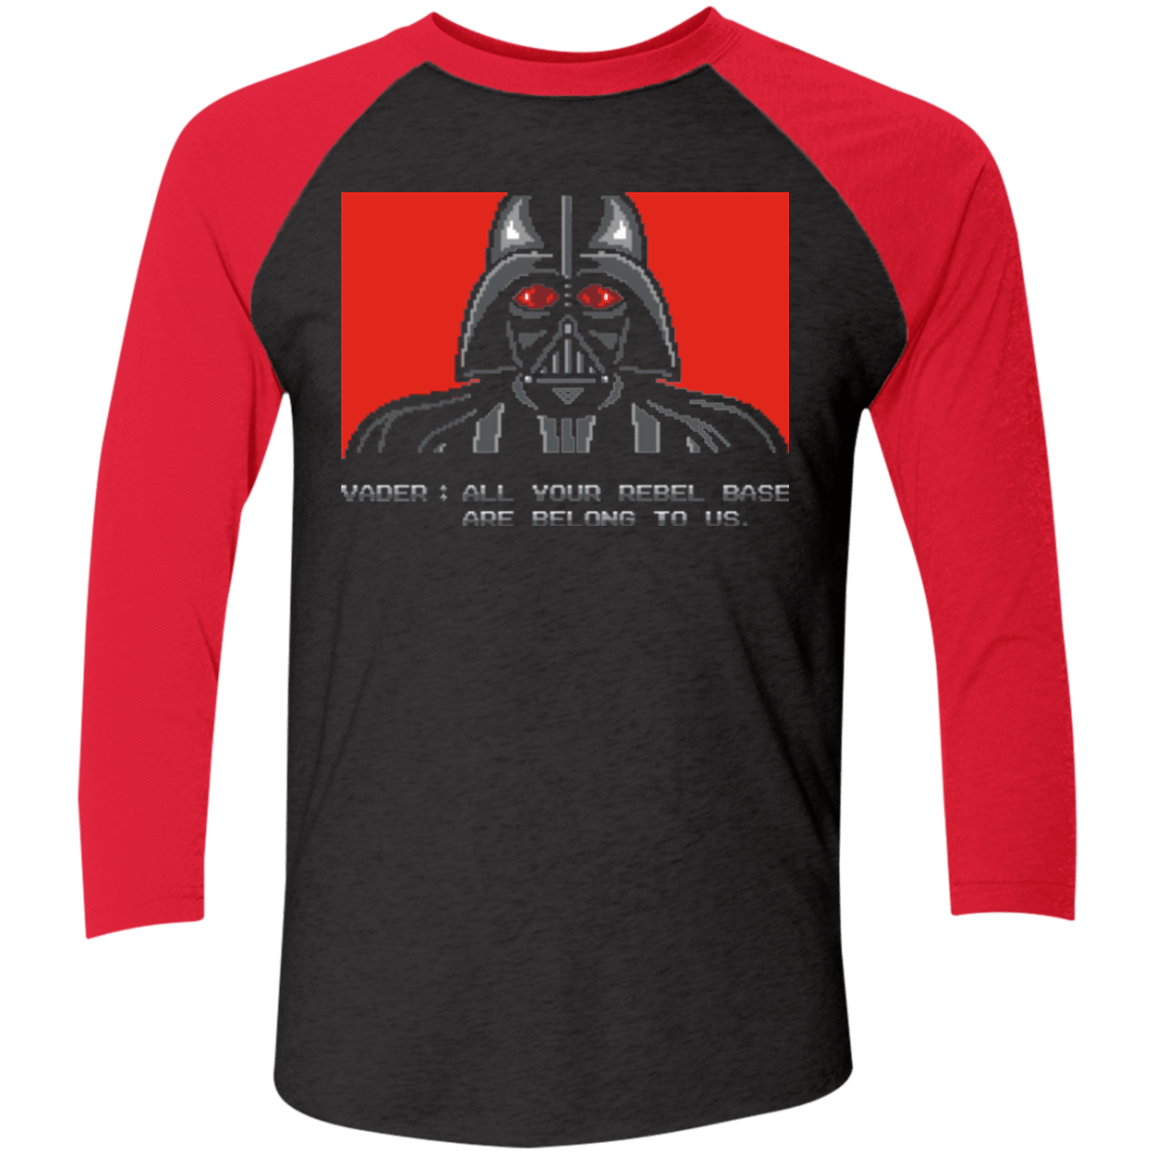 T-Shirts Vintage Black/Vintage Red / X-Small All your rebel base are belongs to us Men's Triblend 3/4 Sleeve